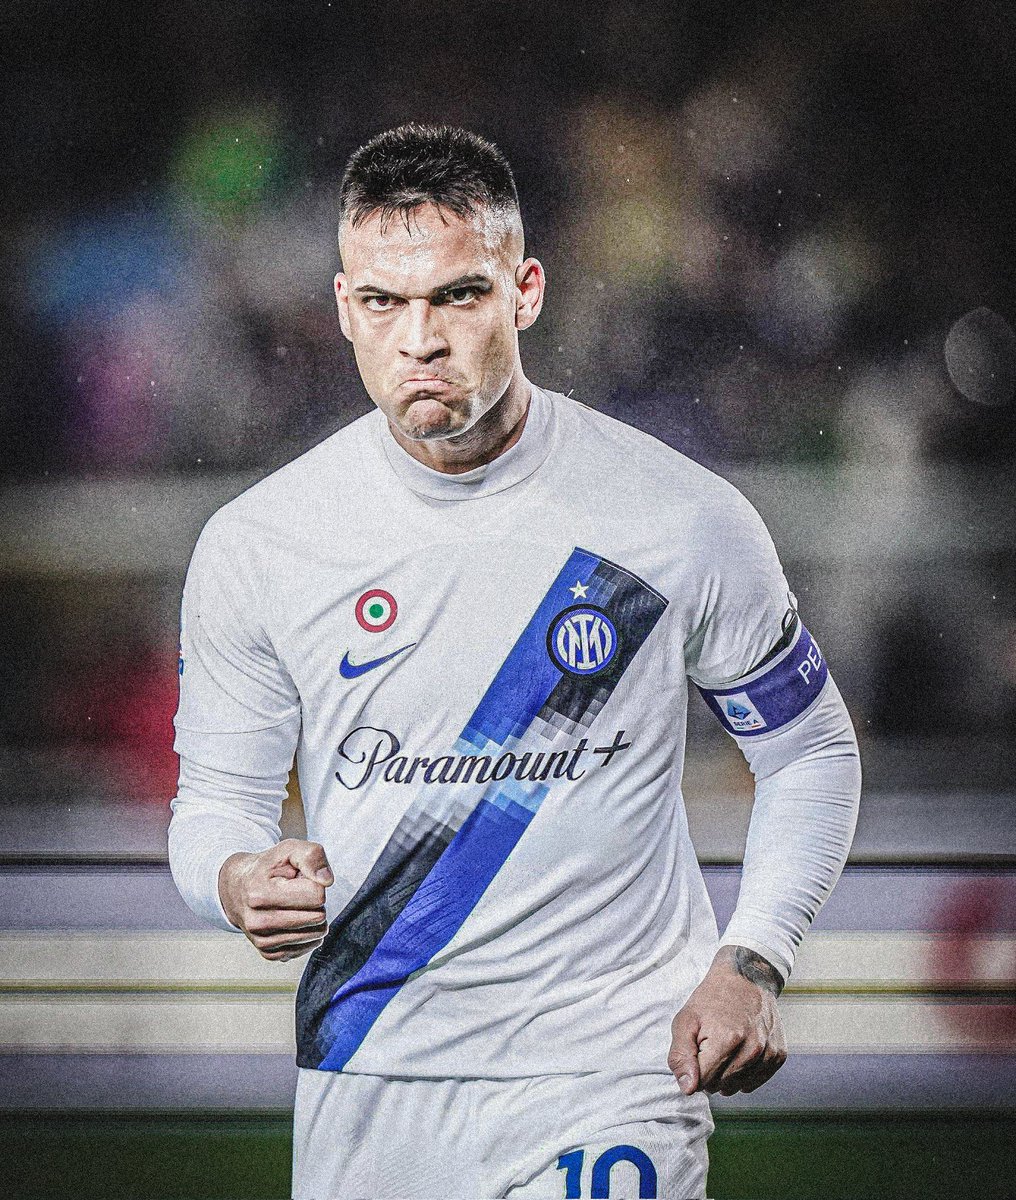 🚨🇦🇷 Lautaro requested a salary of more than 10M€ for renewal, there is a distance between Inter's offer and Lautaro demands. 

@GuarroPas